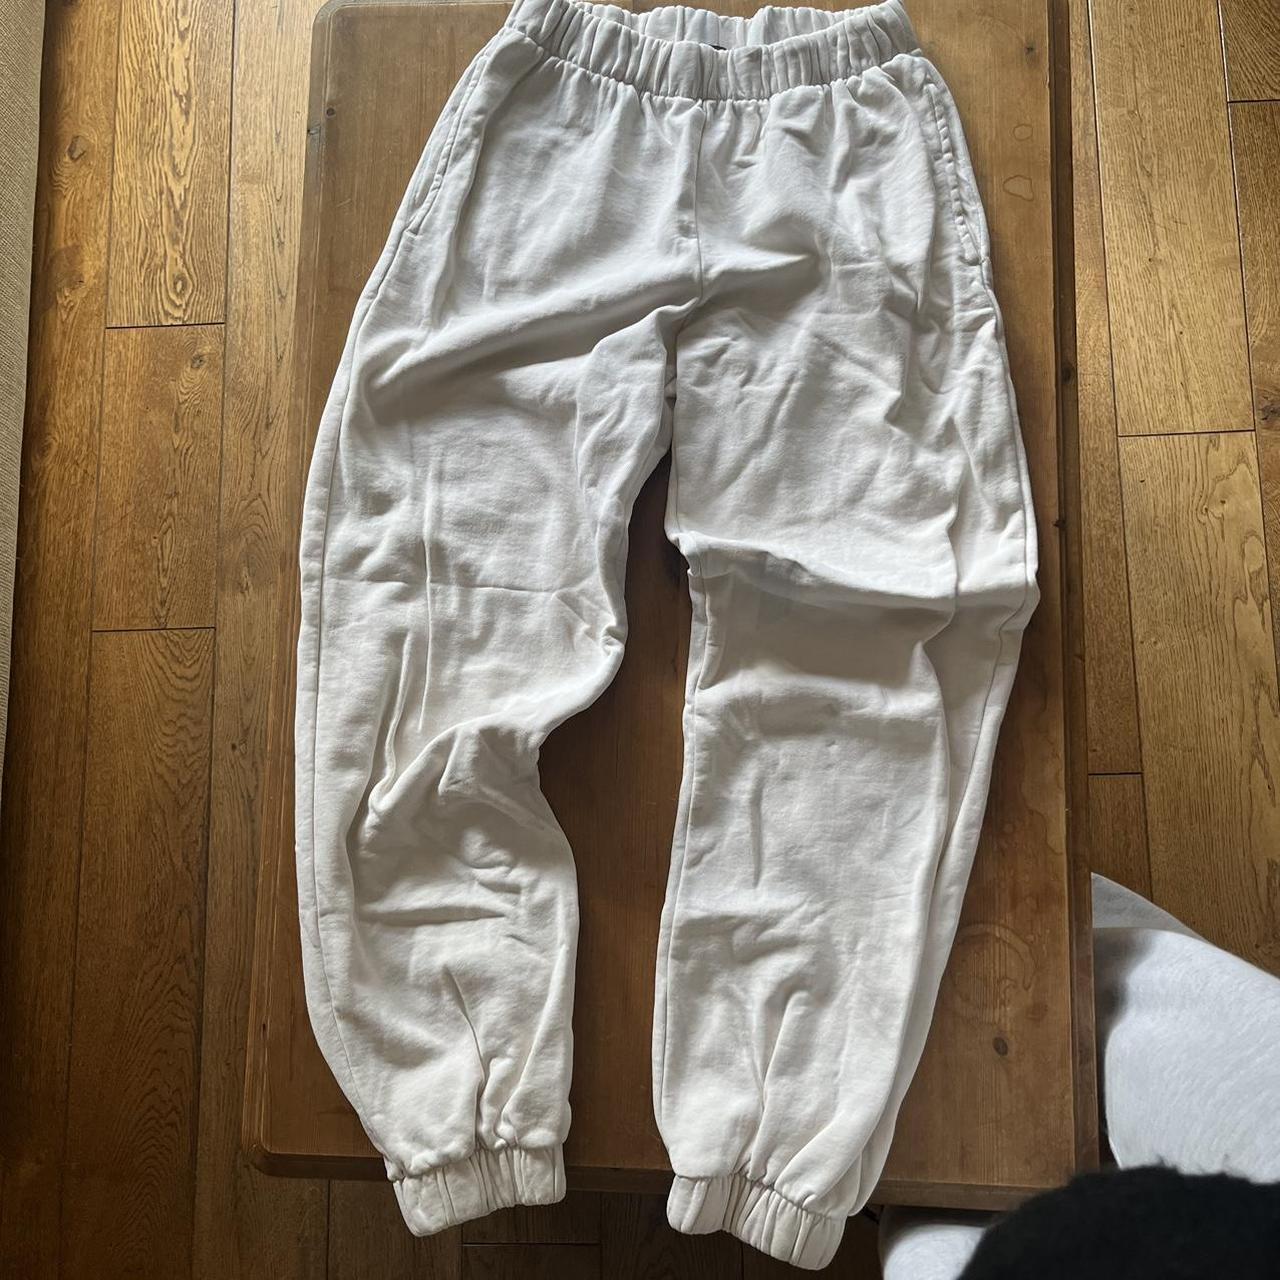 Brandy Melville joggers / trackies in cream colour.... - Depop